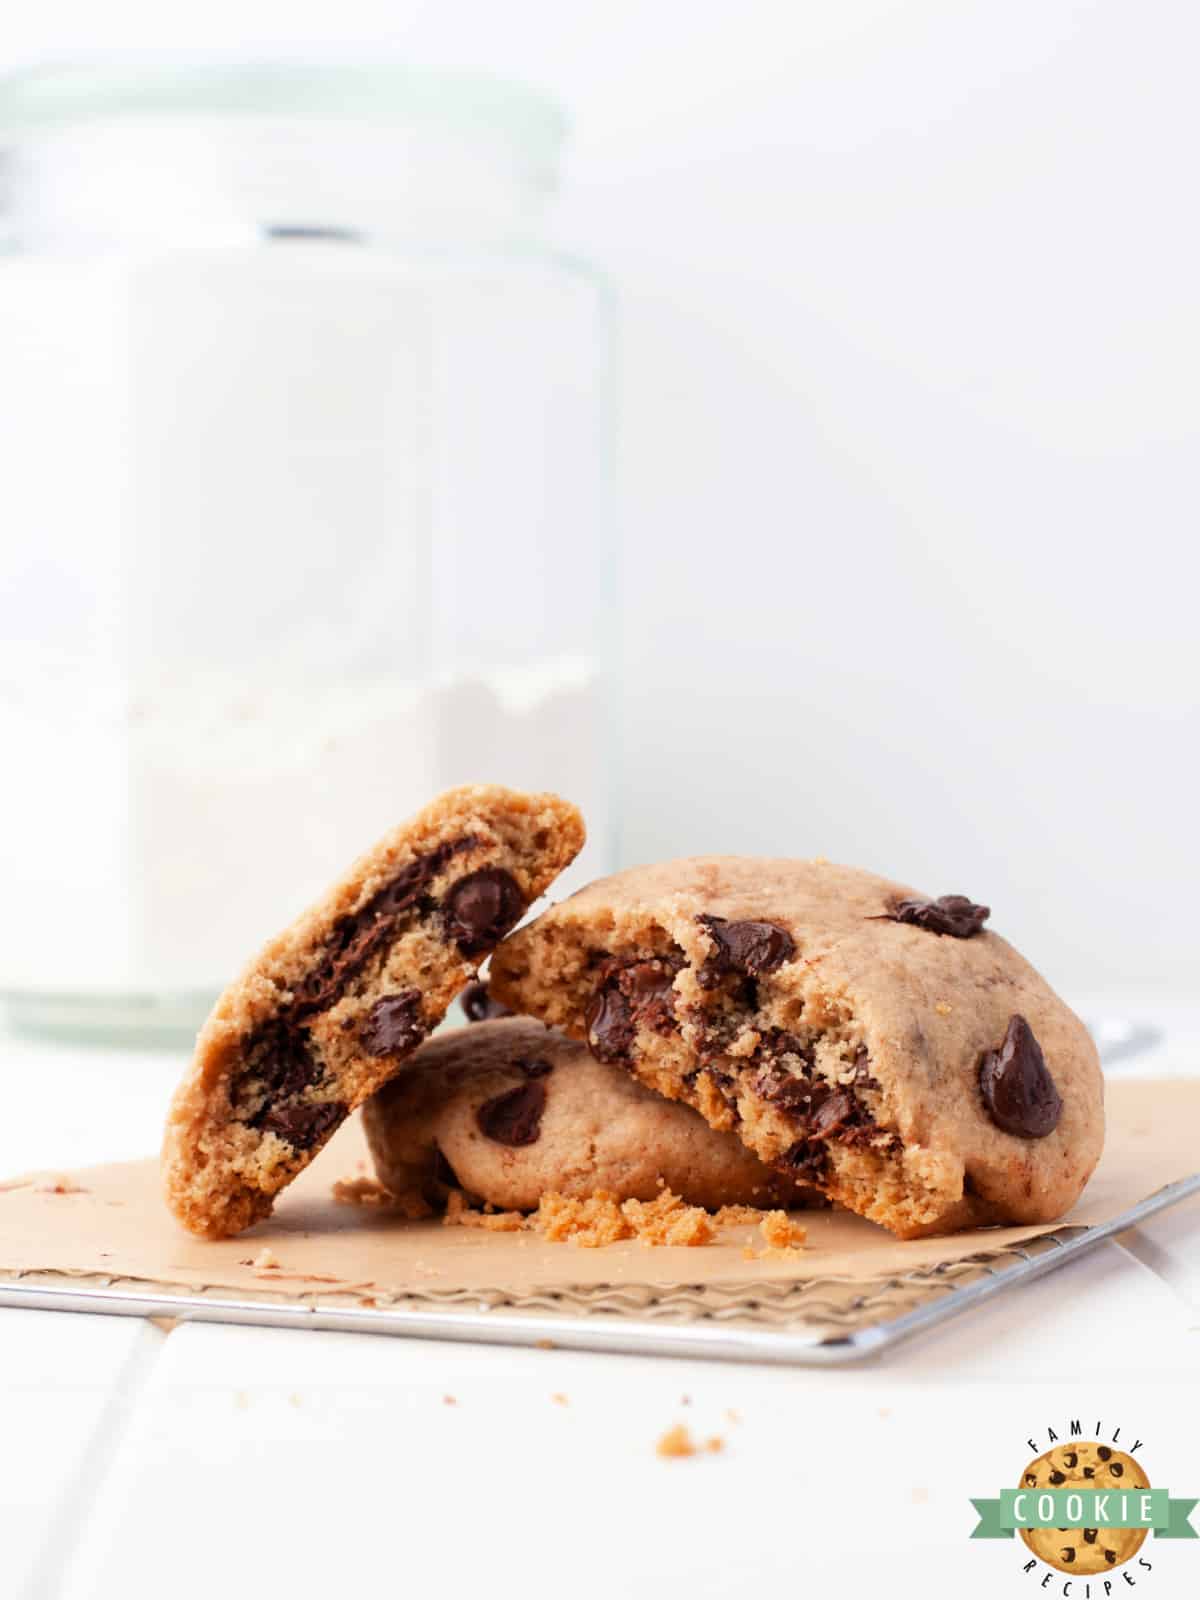 Nutella Stuffed Chocolate Chip Cookies take a classic chocolate chip cookie recipe to the next level. The only thing better than a chocolate chip cookie is one with Nutella in the middle! 